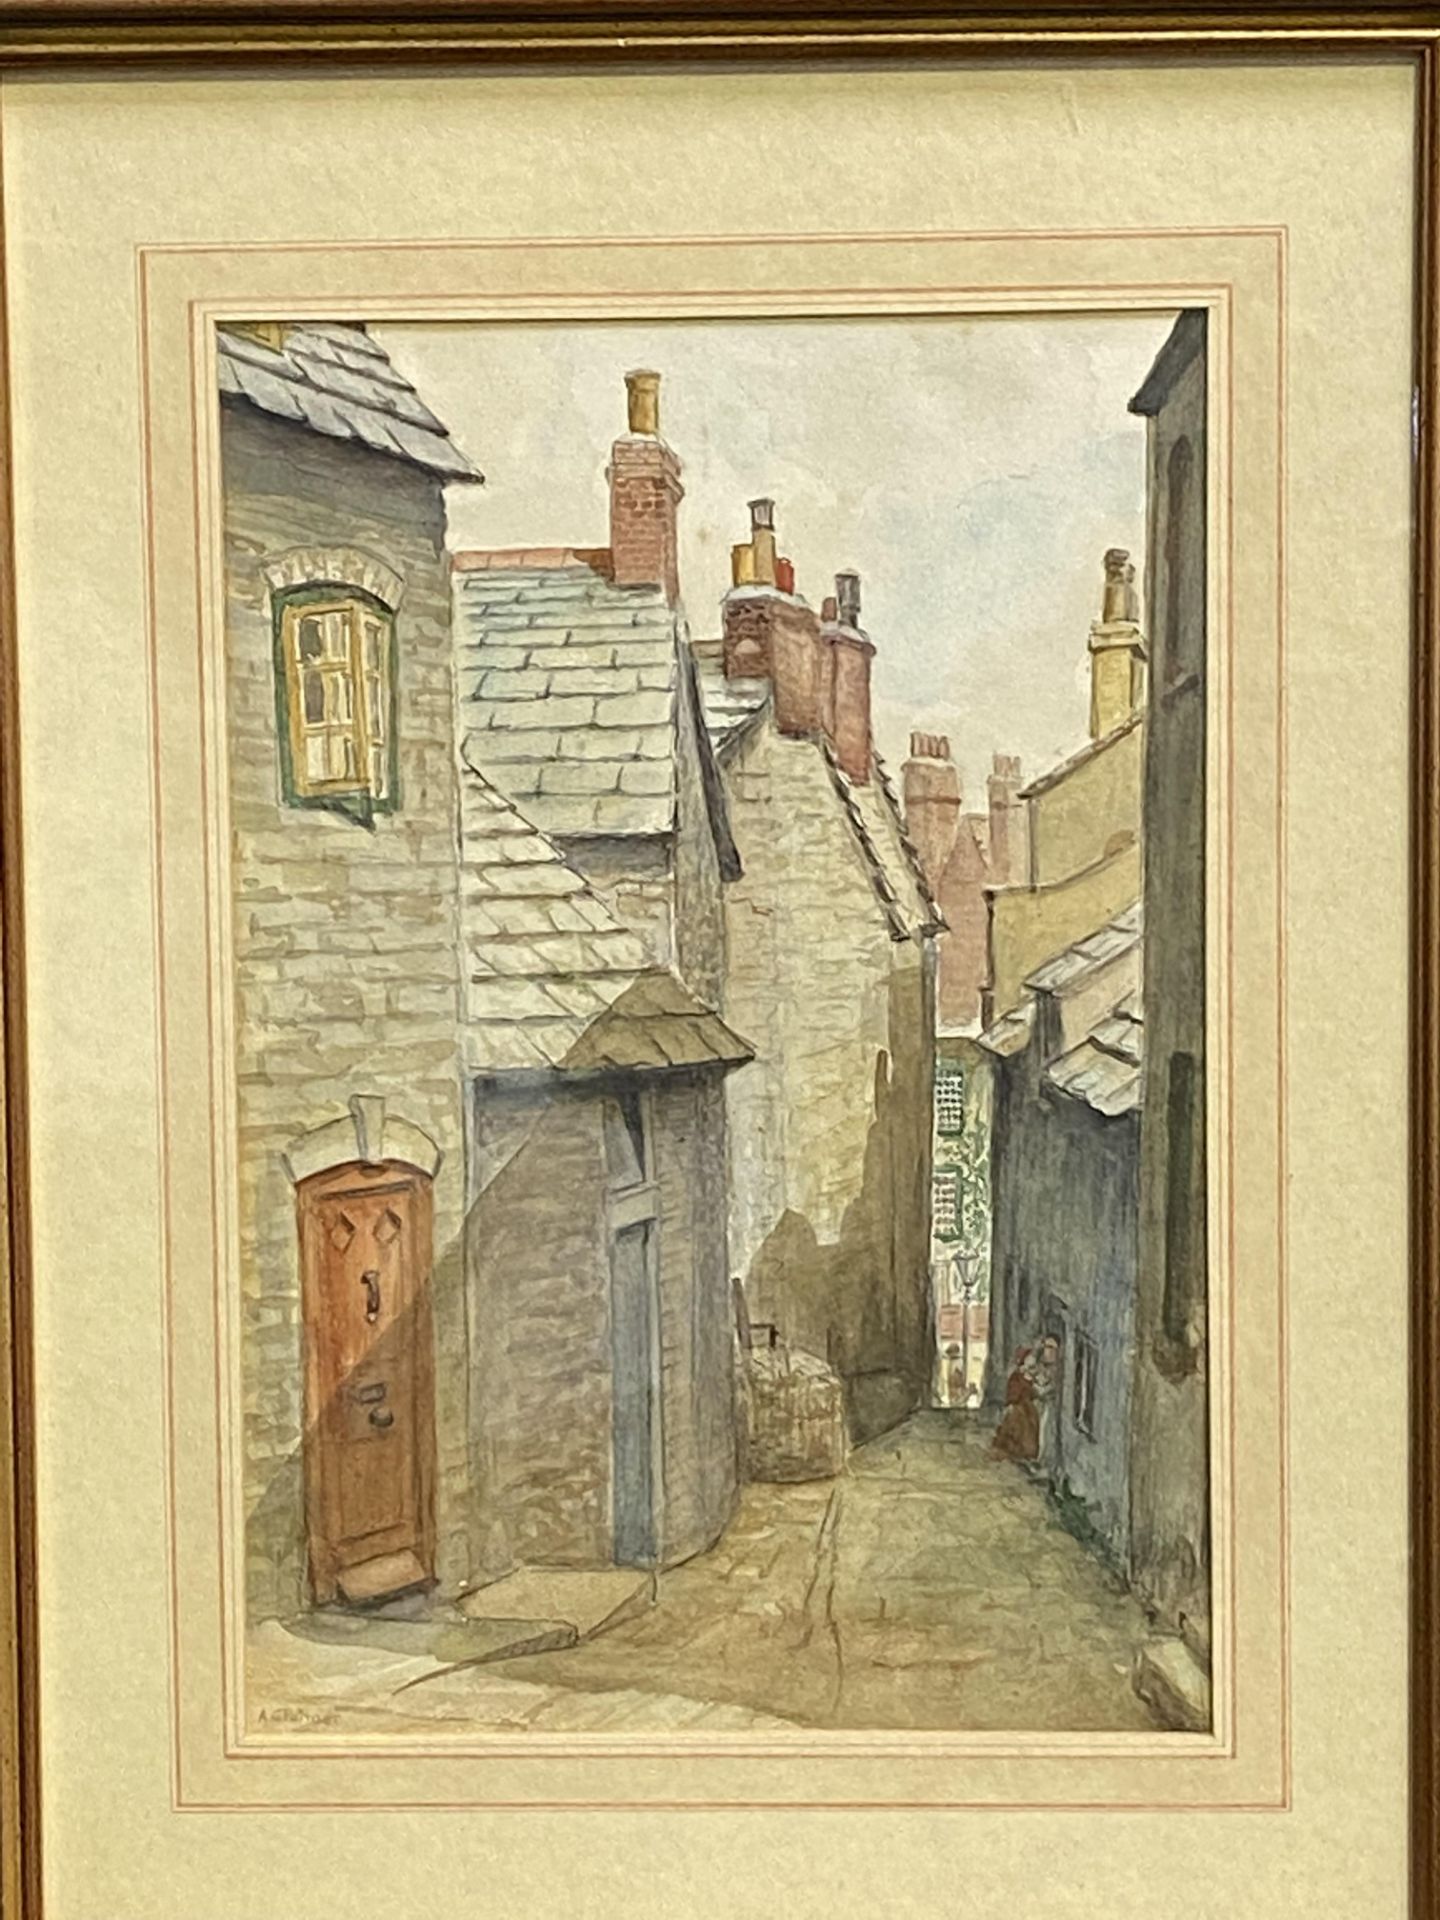 A. G. Palmer - framed and glazed watercolour - Image 2 of 4